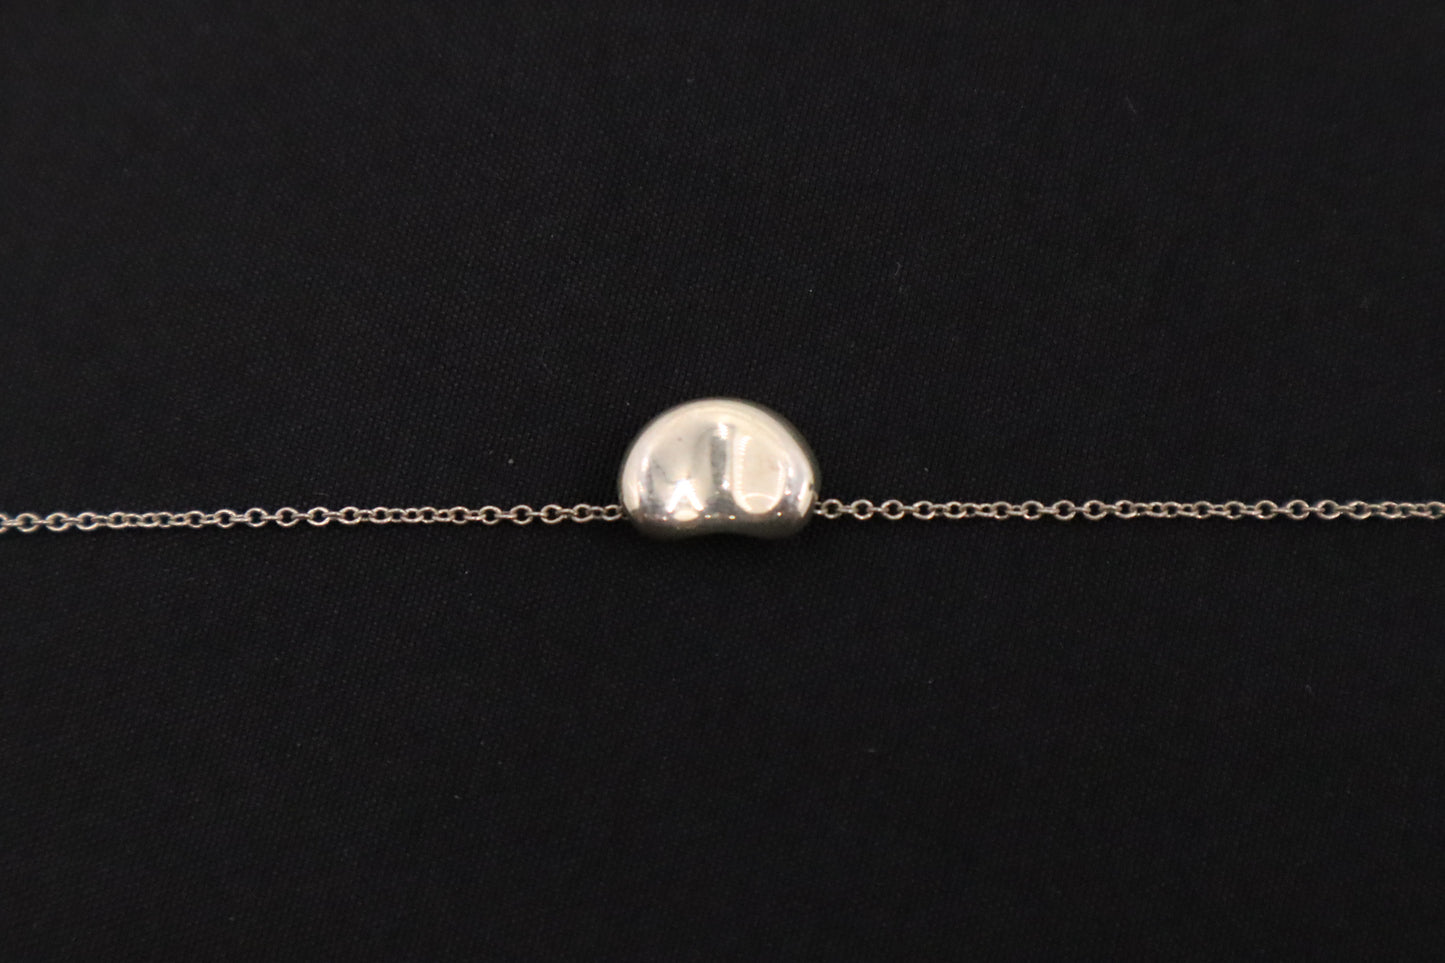 Tiffany & Co. Bean Necklace in Sterling Silver